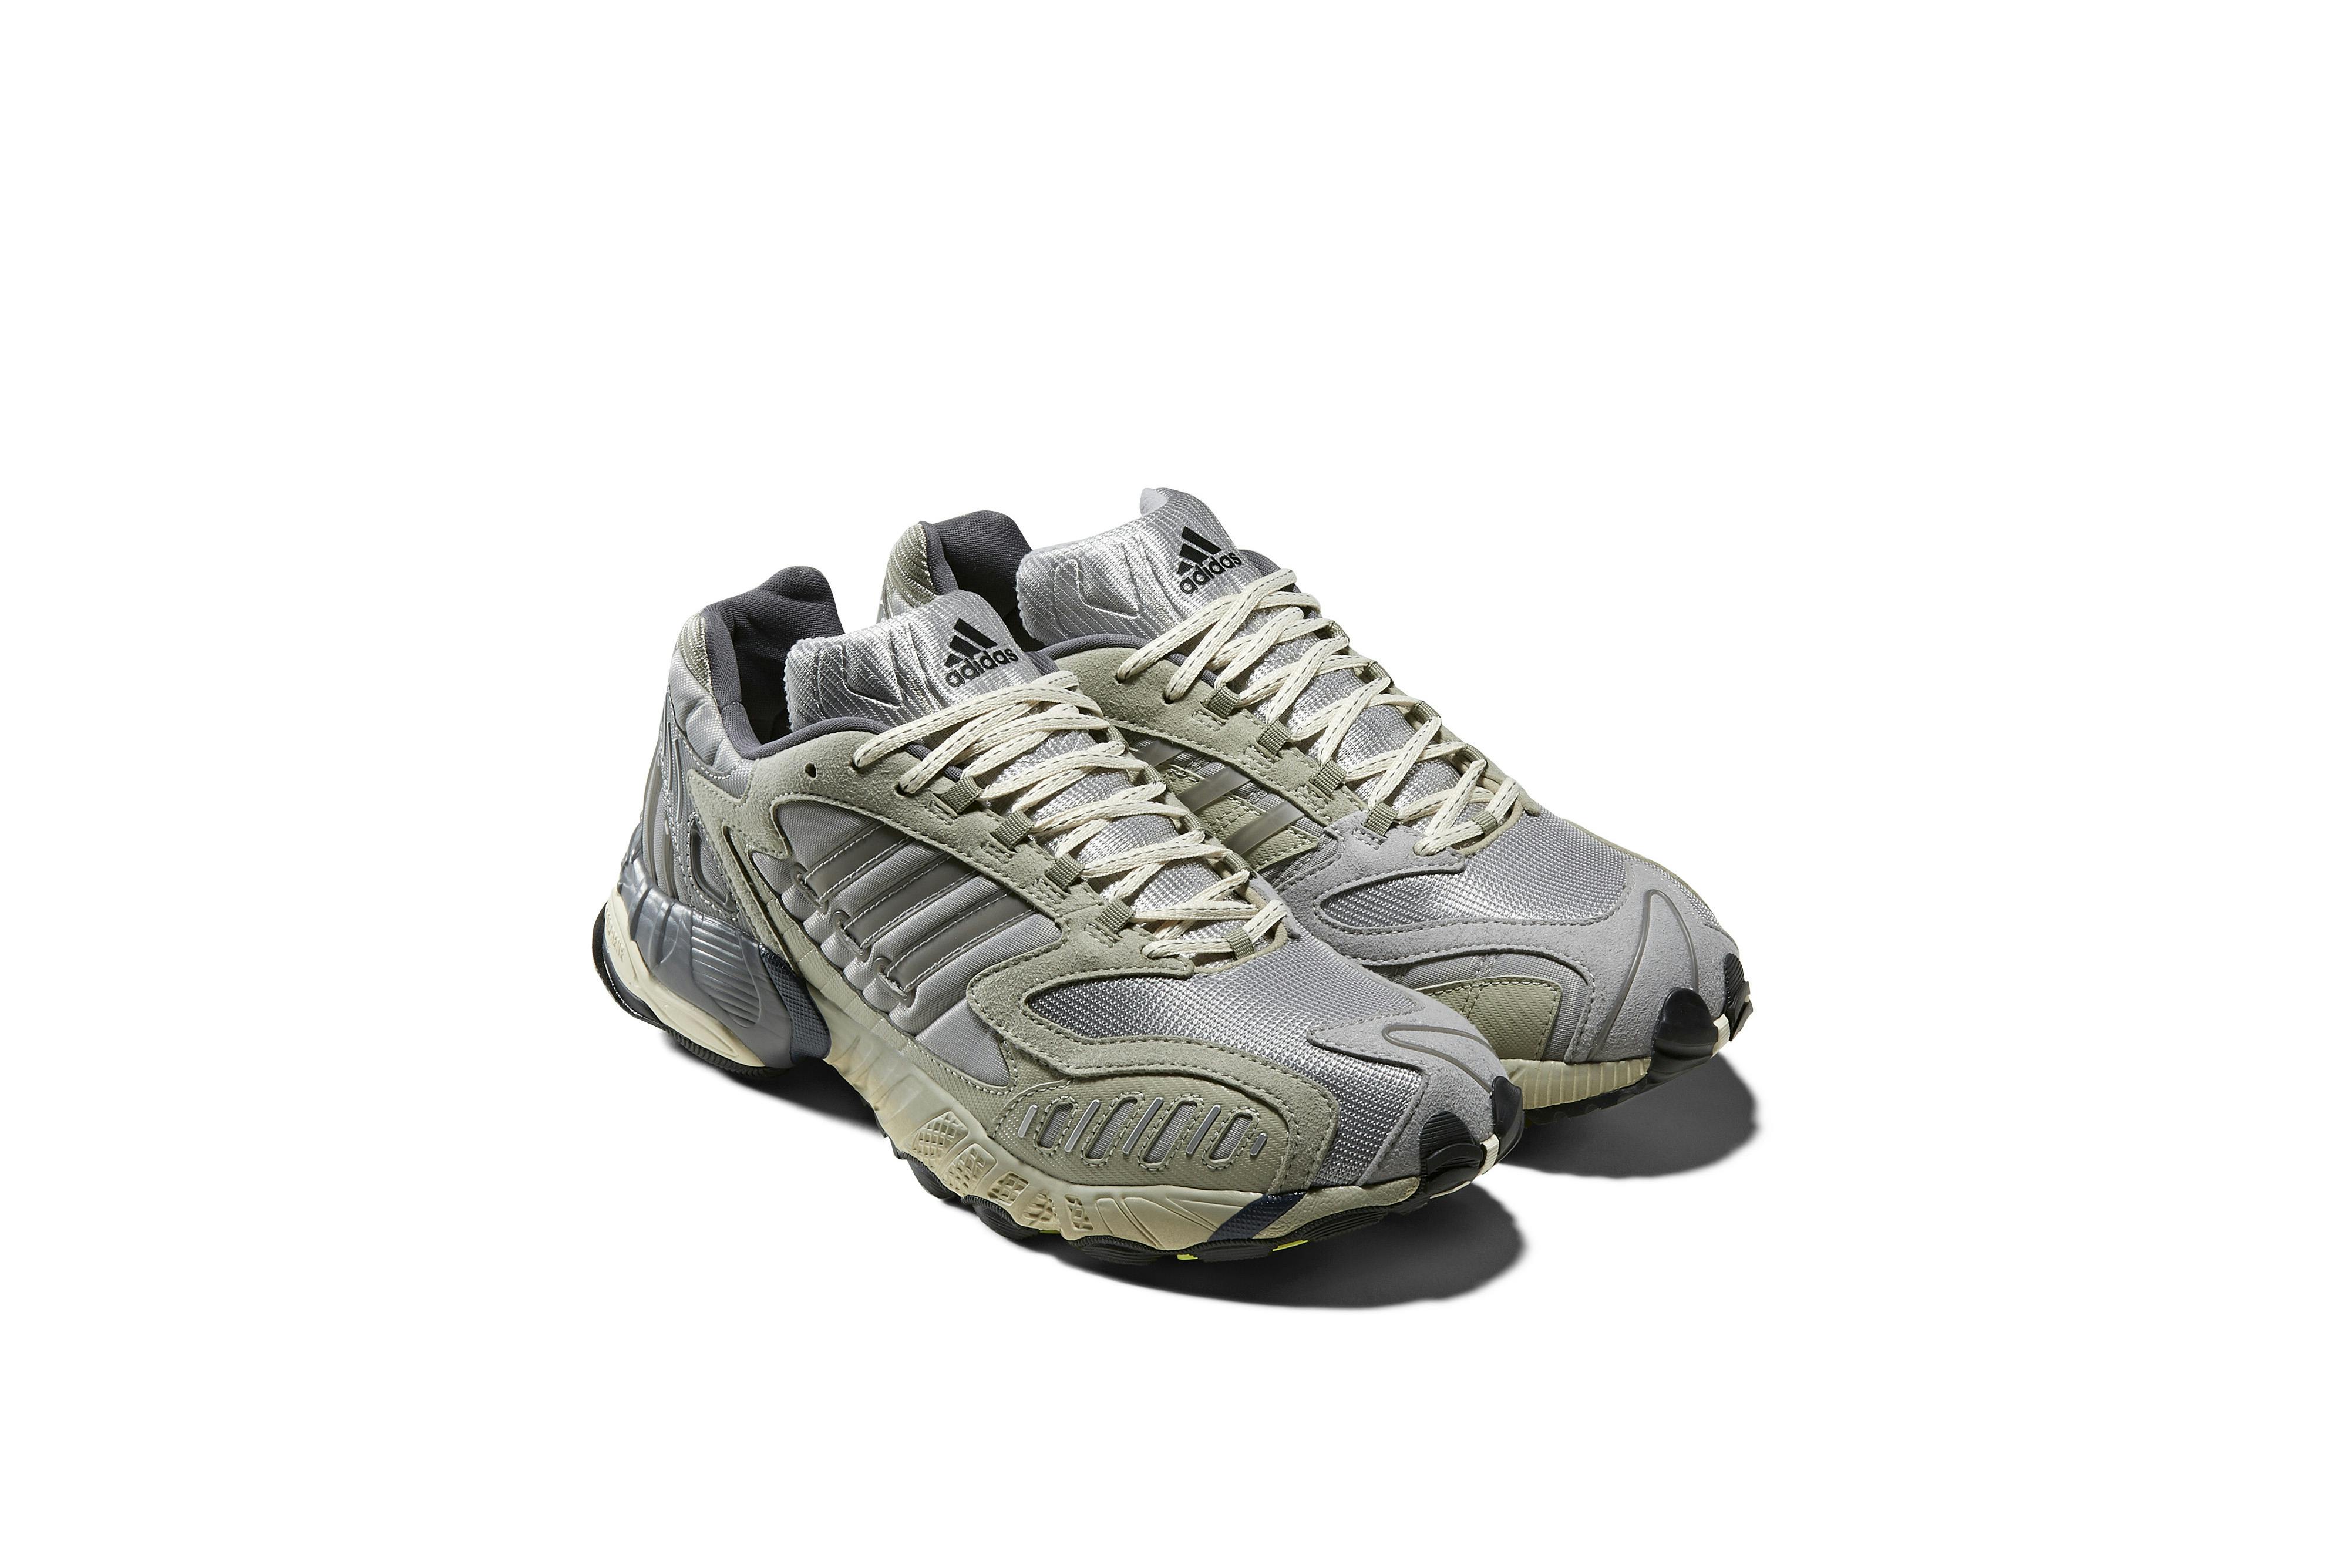 Elektricien Vriend Occlusie adidas x Norse Projects Torsion TRDC - Register Now on END. (US) Launches |  END. (US)